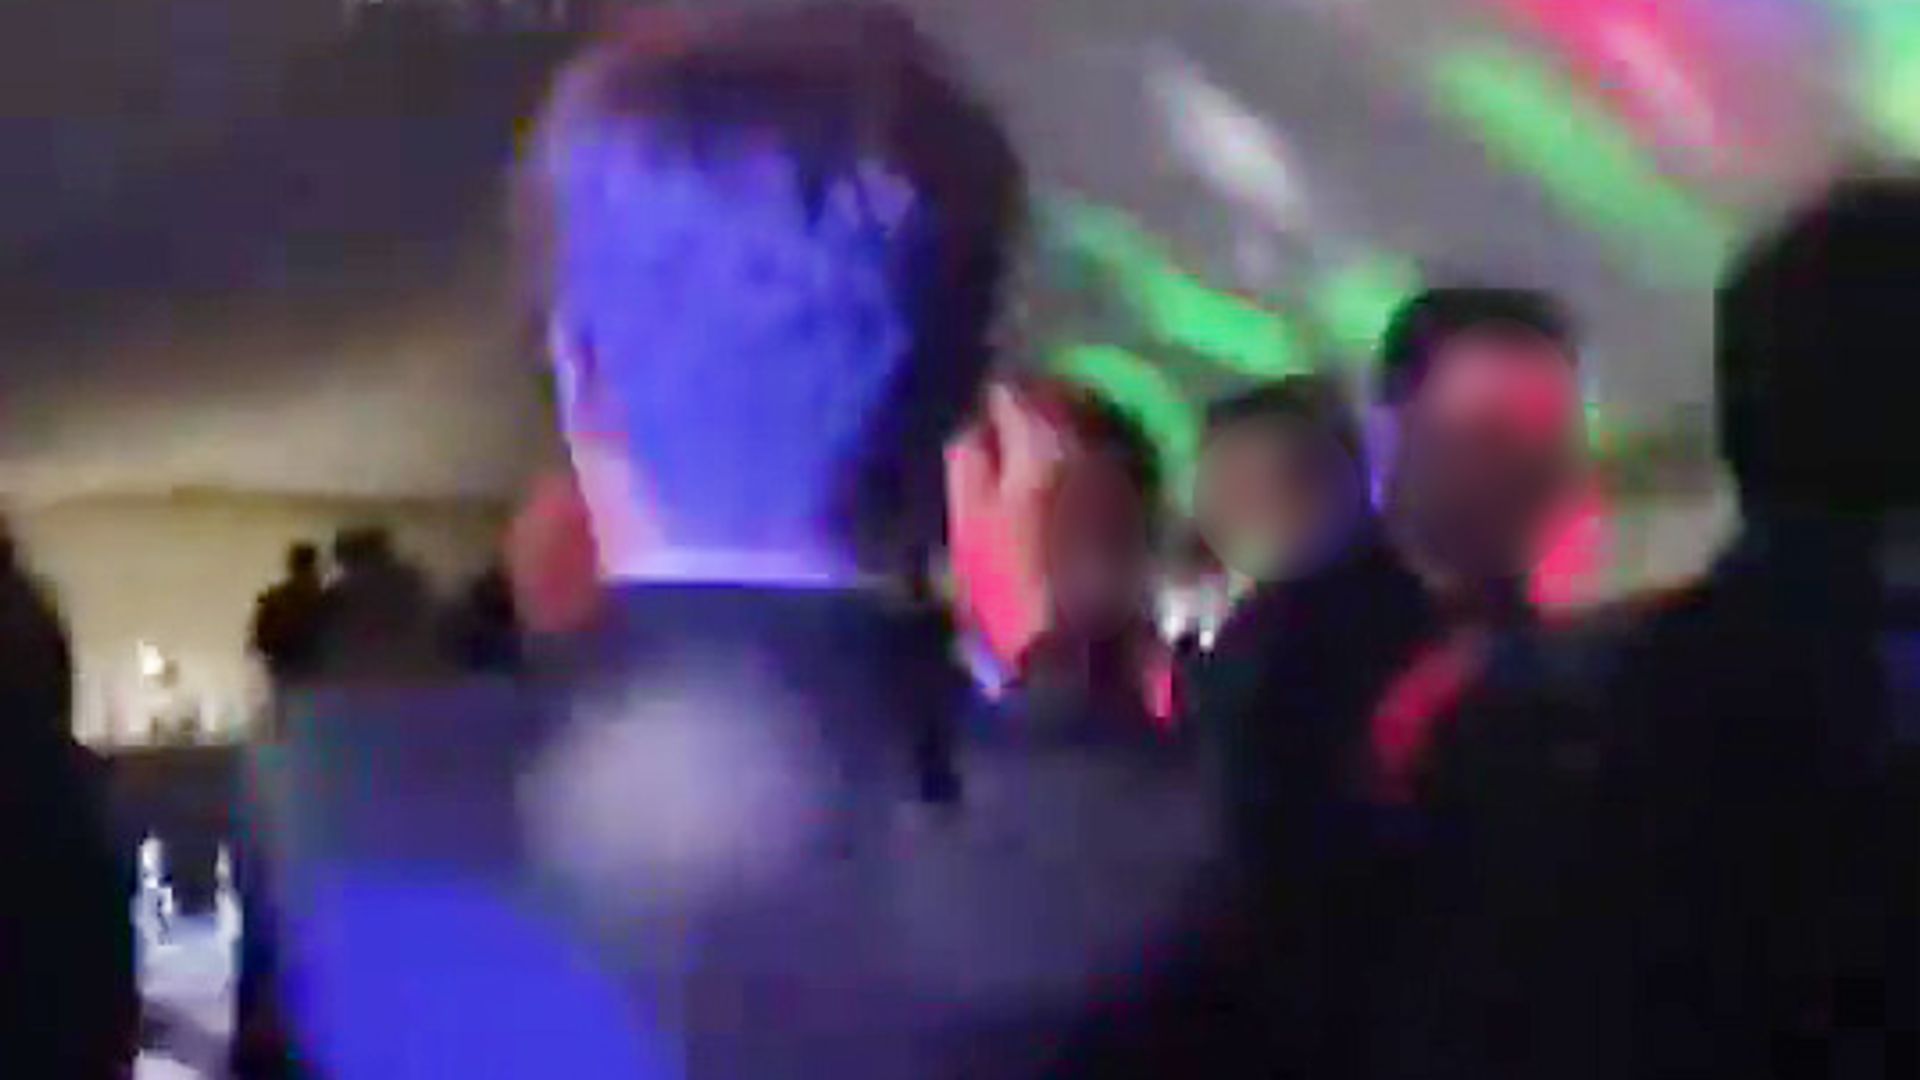 Members of Tory student group 'filmed singing and dancing to Nazi song'